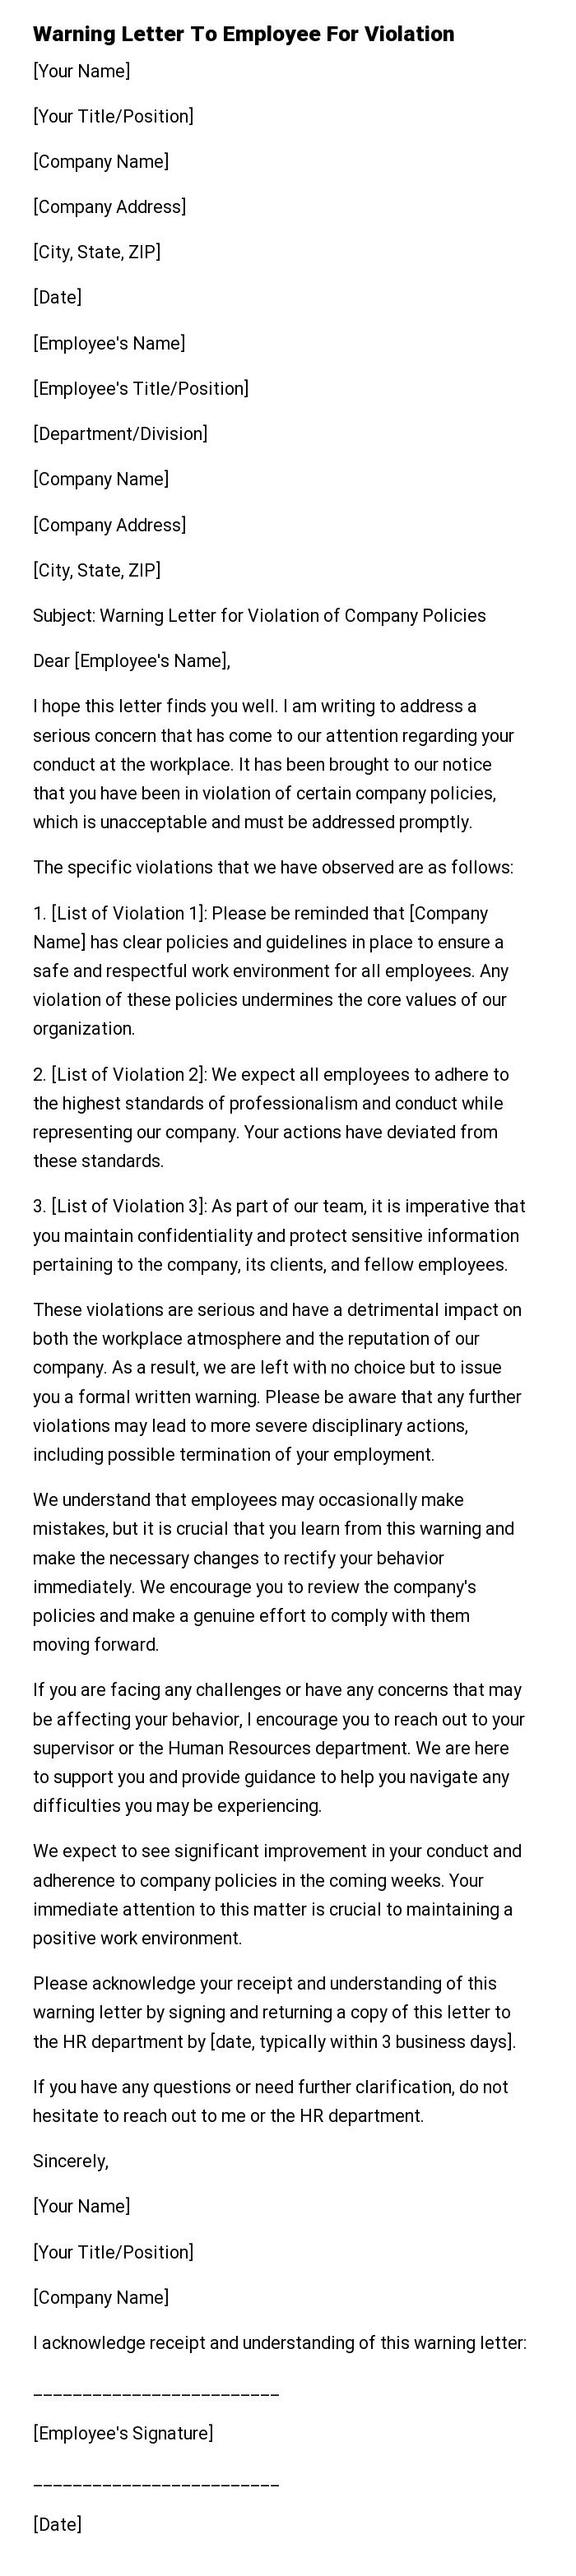 Warning Letter To Employee For Violation